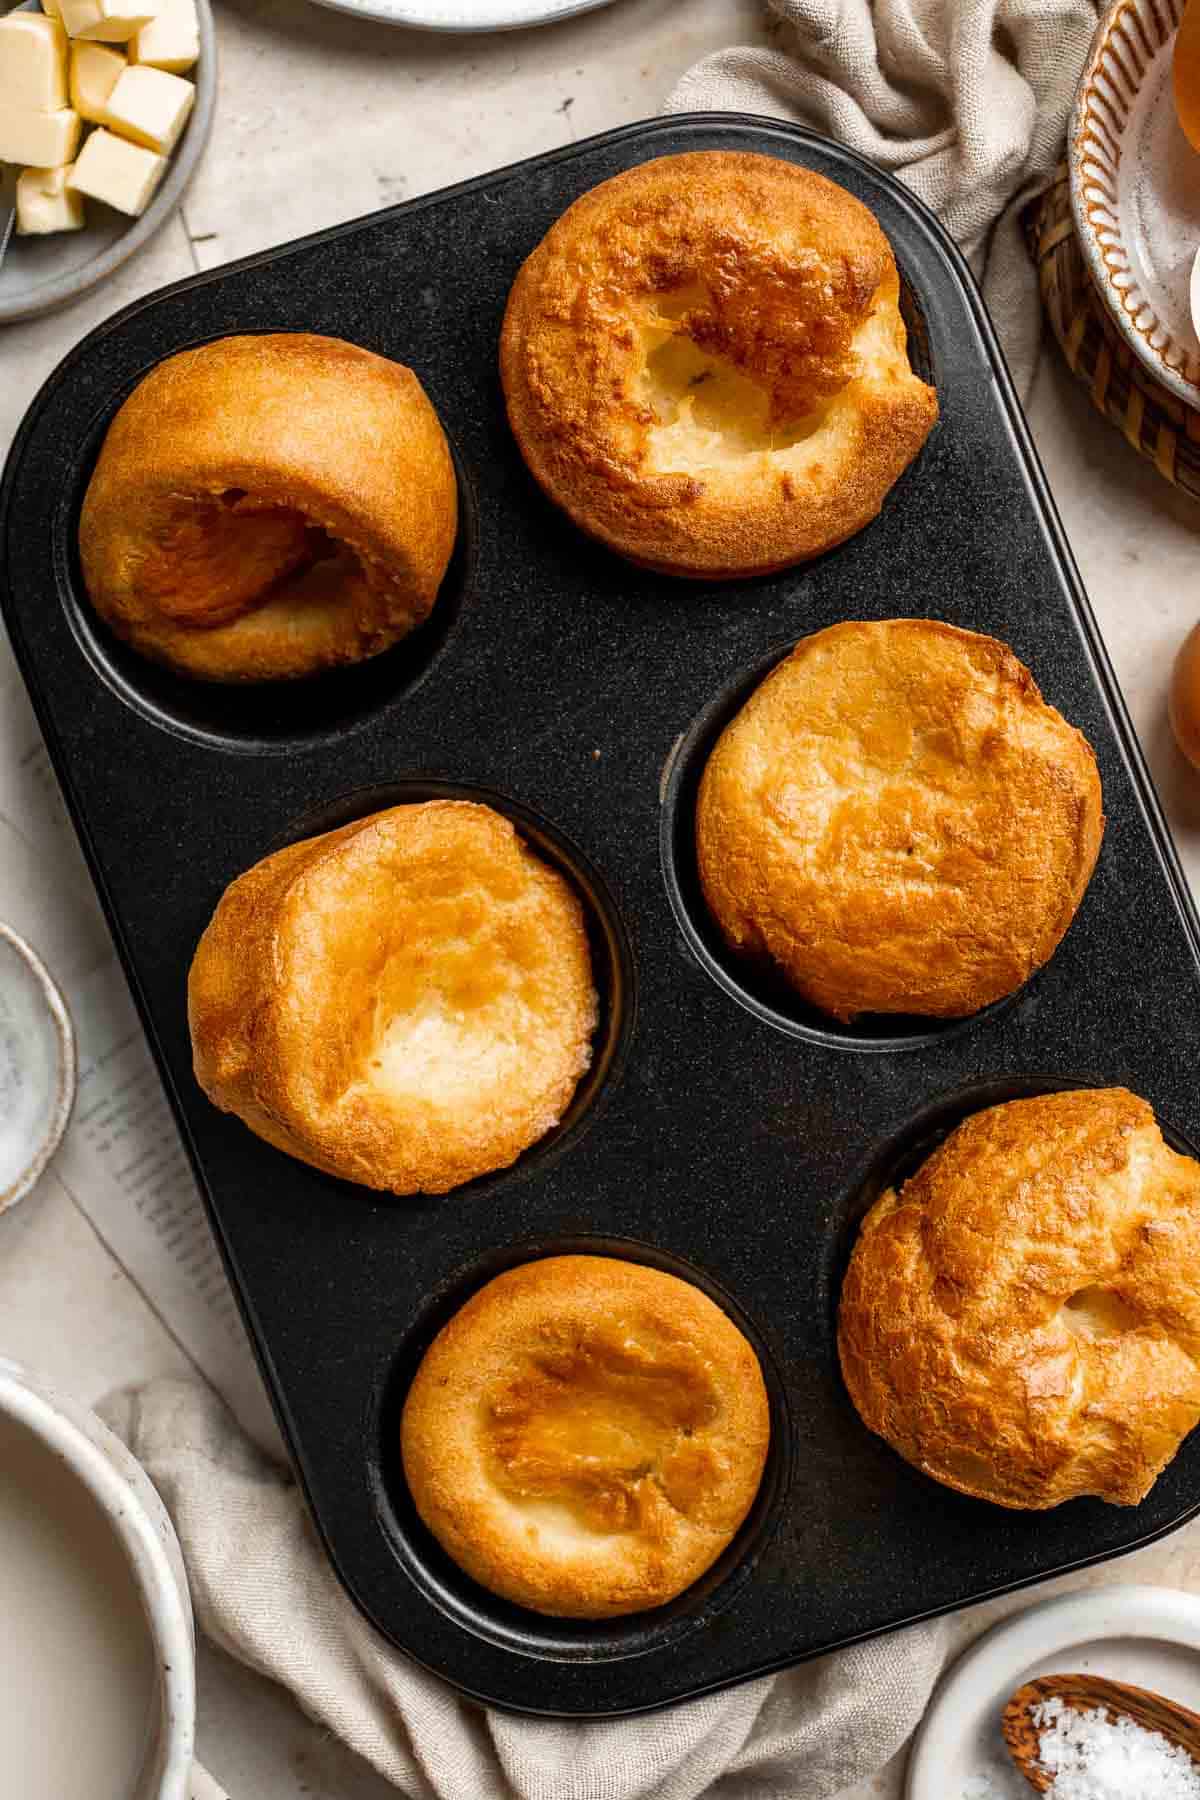 Popovers (or Yorkshire pudding) are light, puffed rolls that "pop over" the top of the pan and are a must-have to serve with your Sunday roast. | aheadofthyme.com